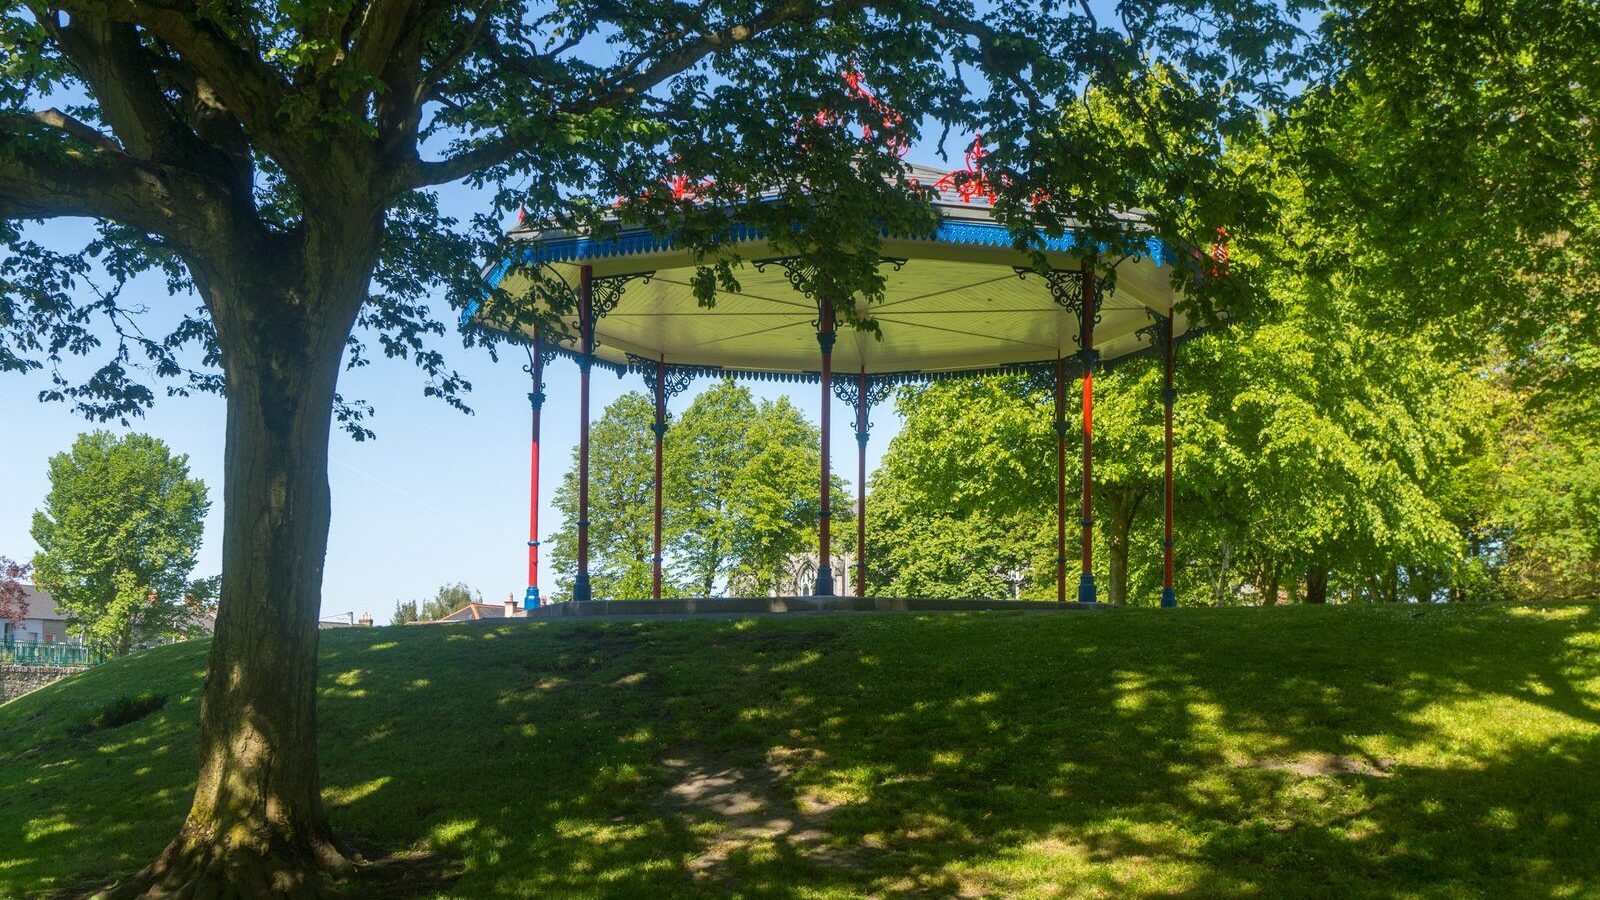 THE PEOPLES PARK IN LIMERICK [2015]-197250-1